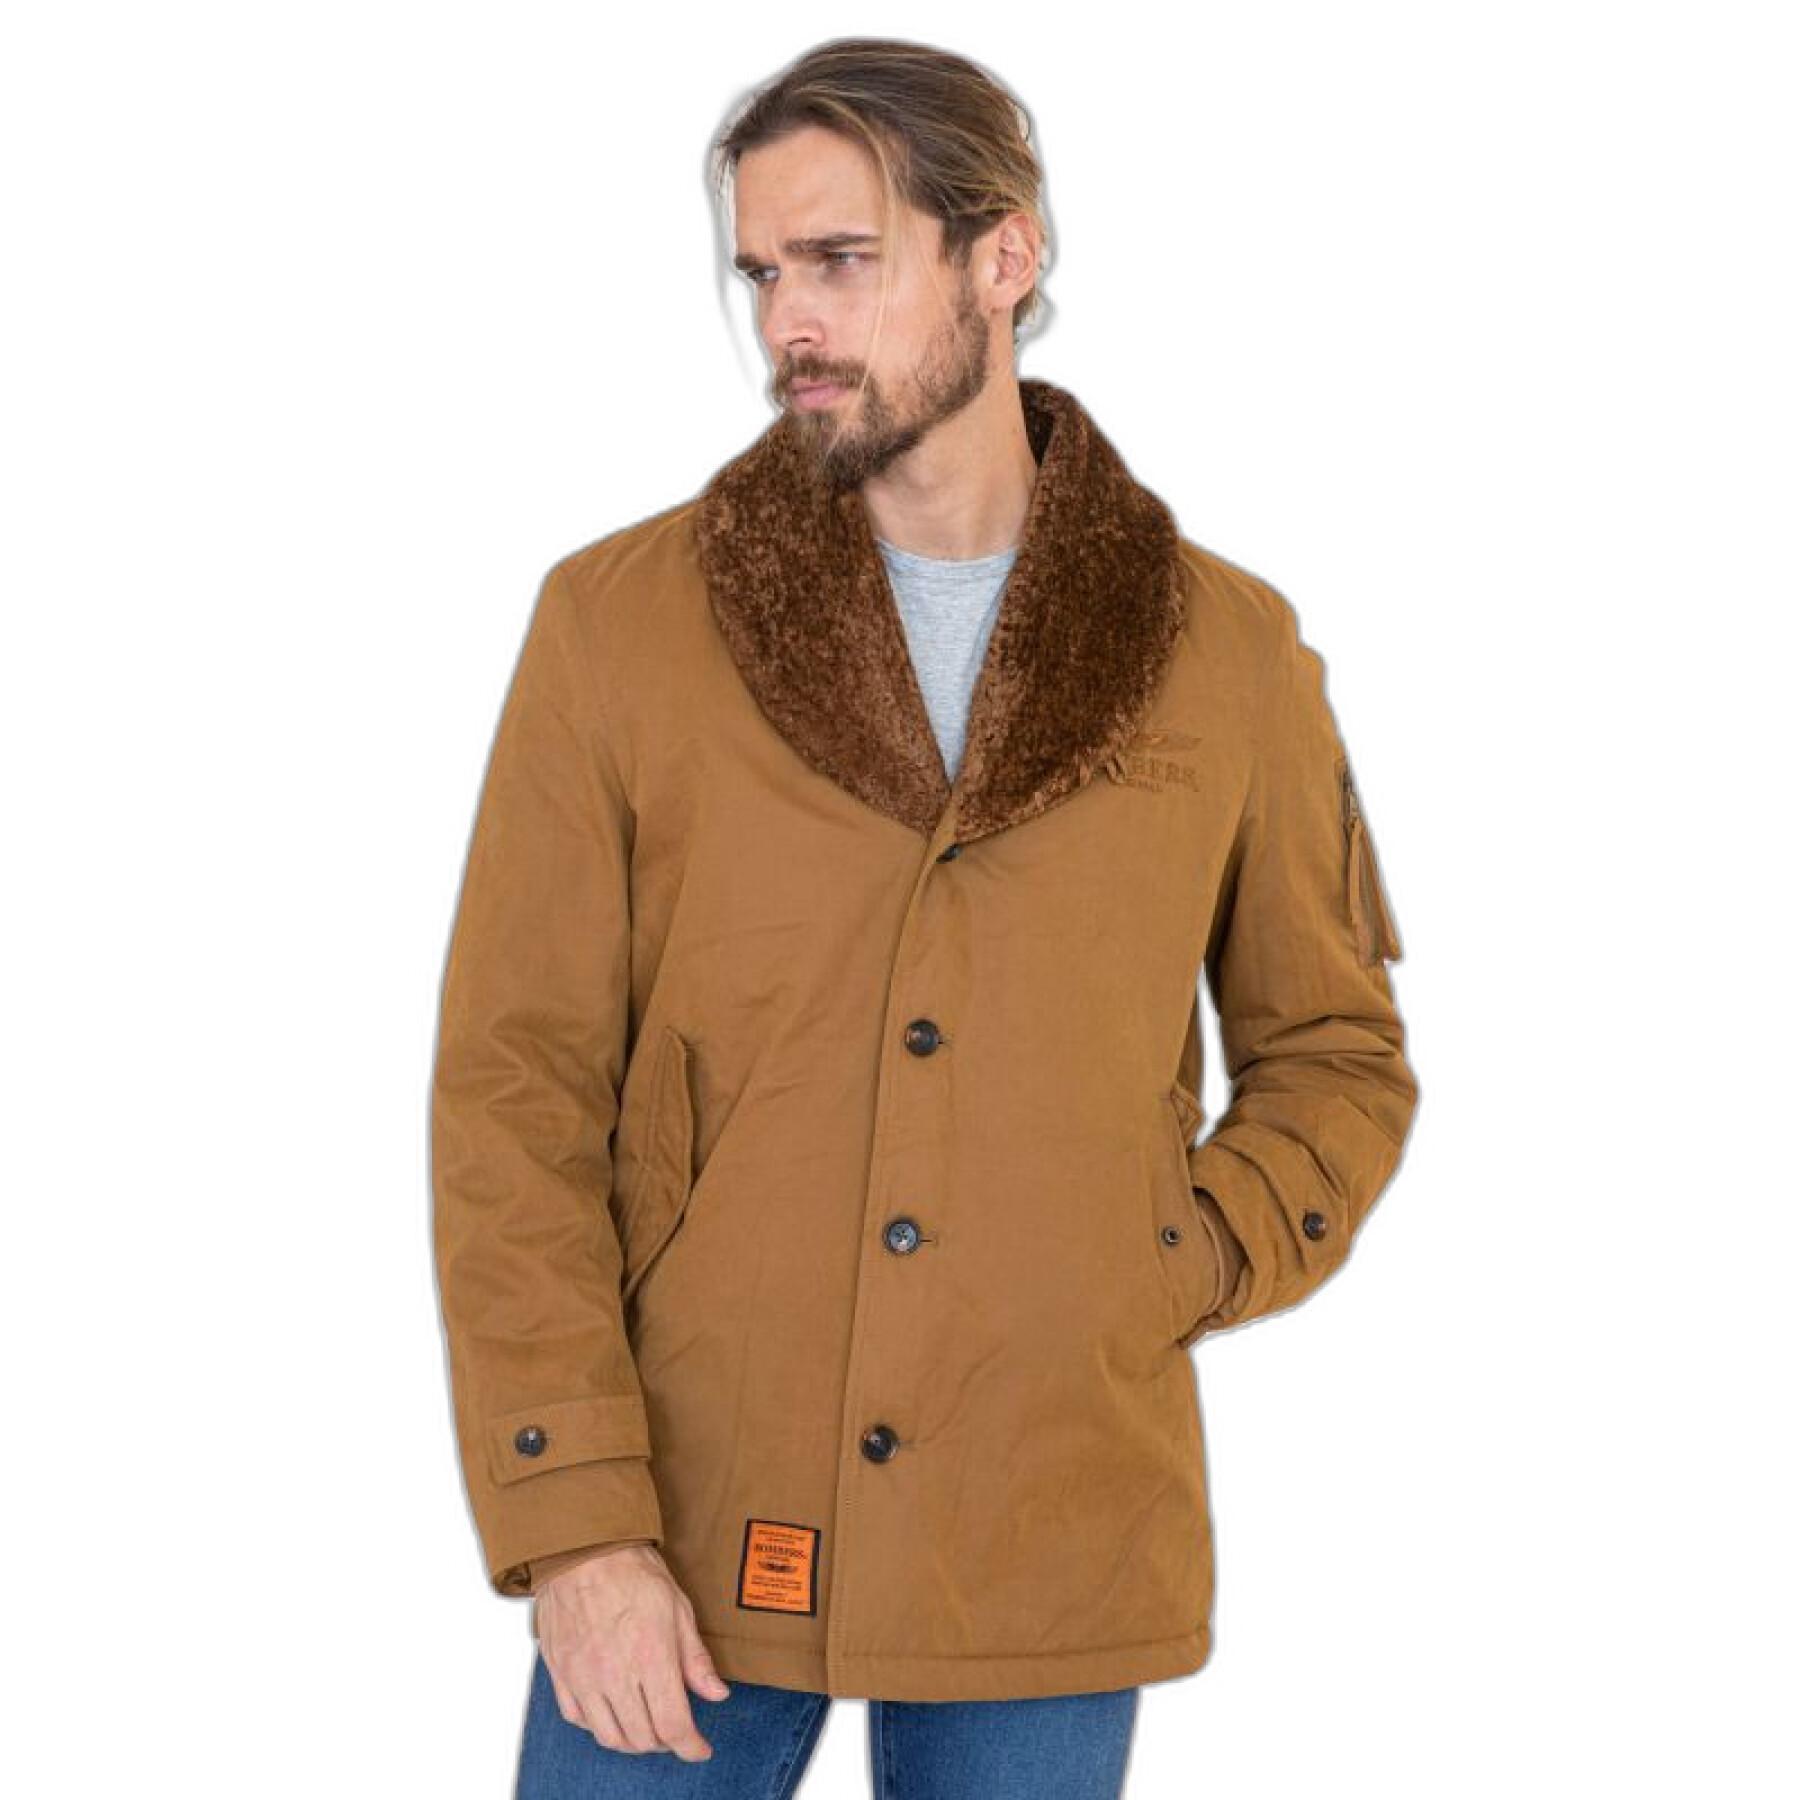 Cappotto Bombers Canadienne